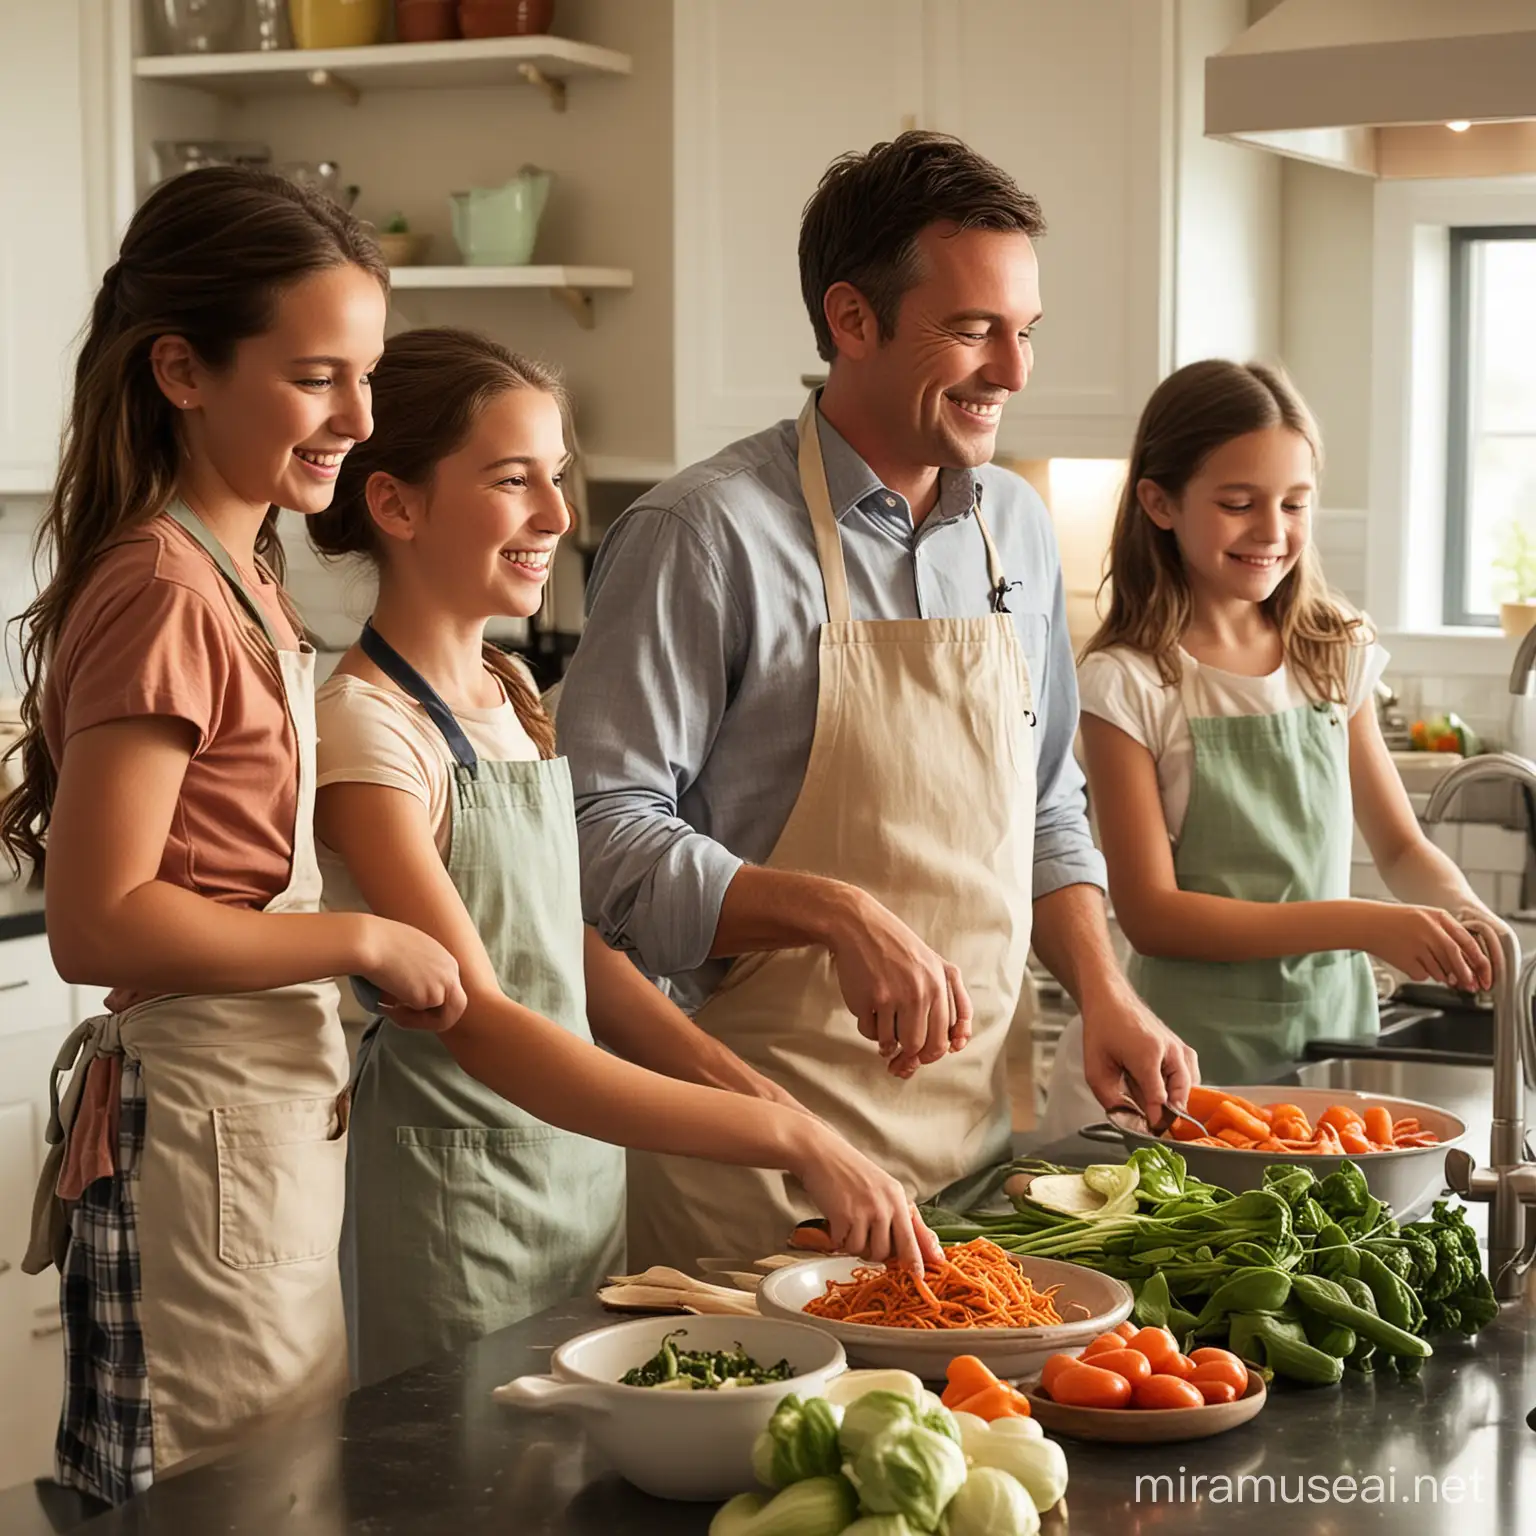 Joyful Family Cooking Together Father and Children Preparing Meal in Warm Kitchen